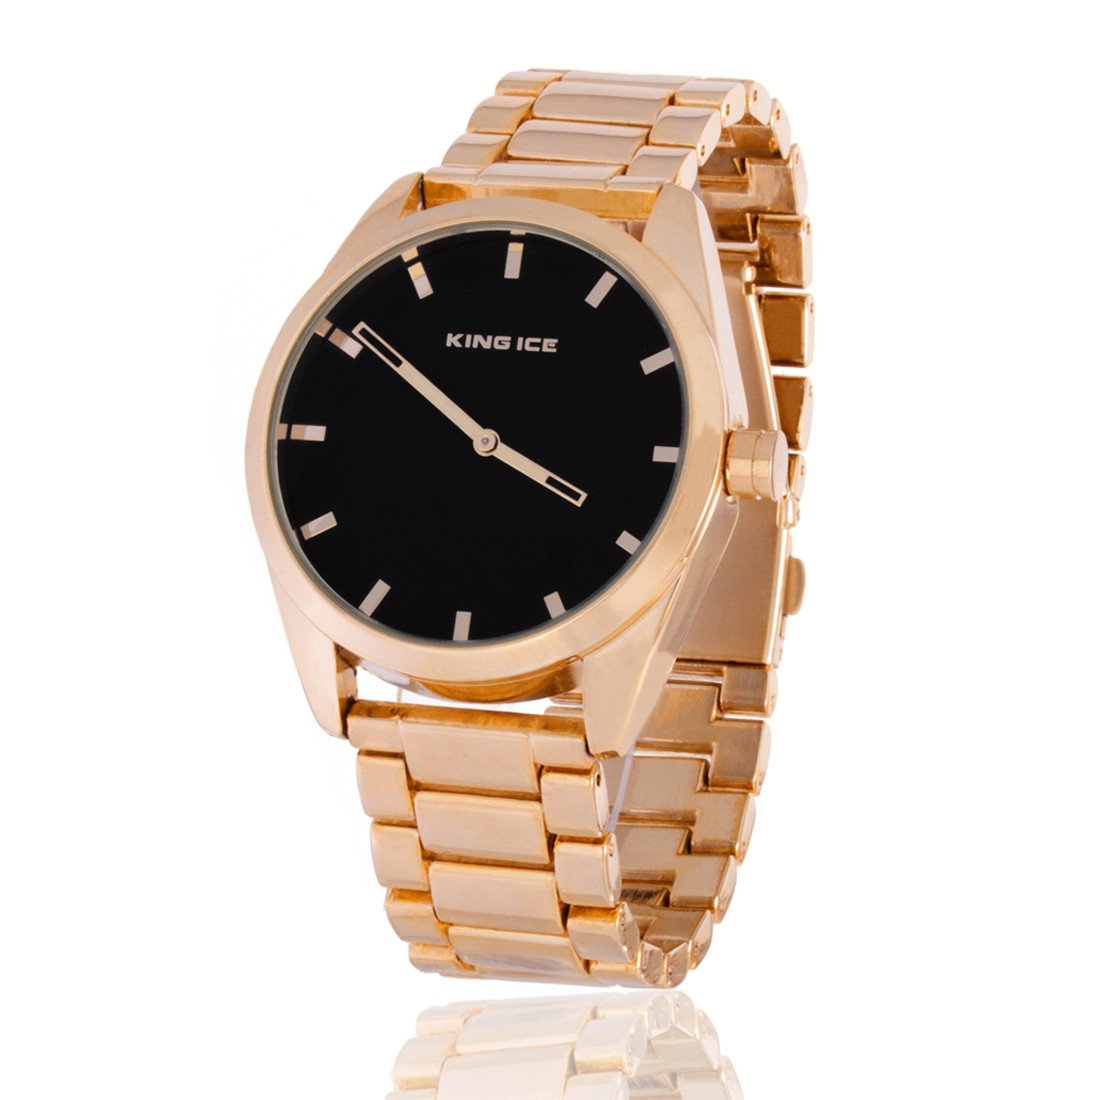 The 14K Gold Tone Watch by King Ice 14K Gold